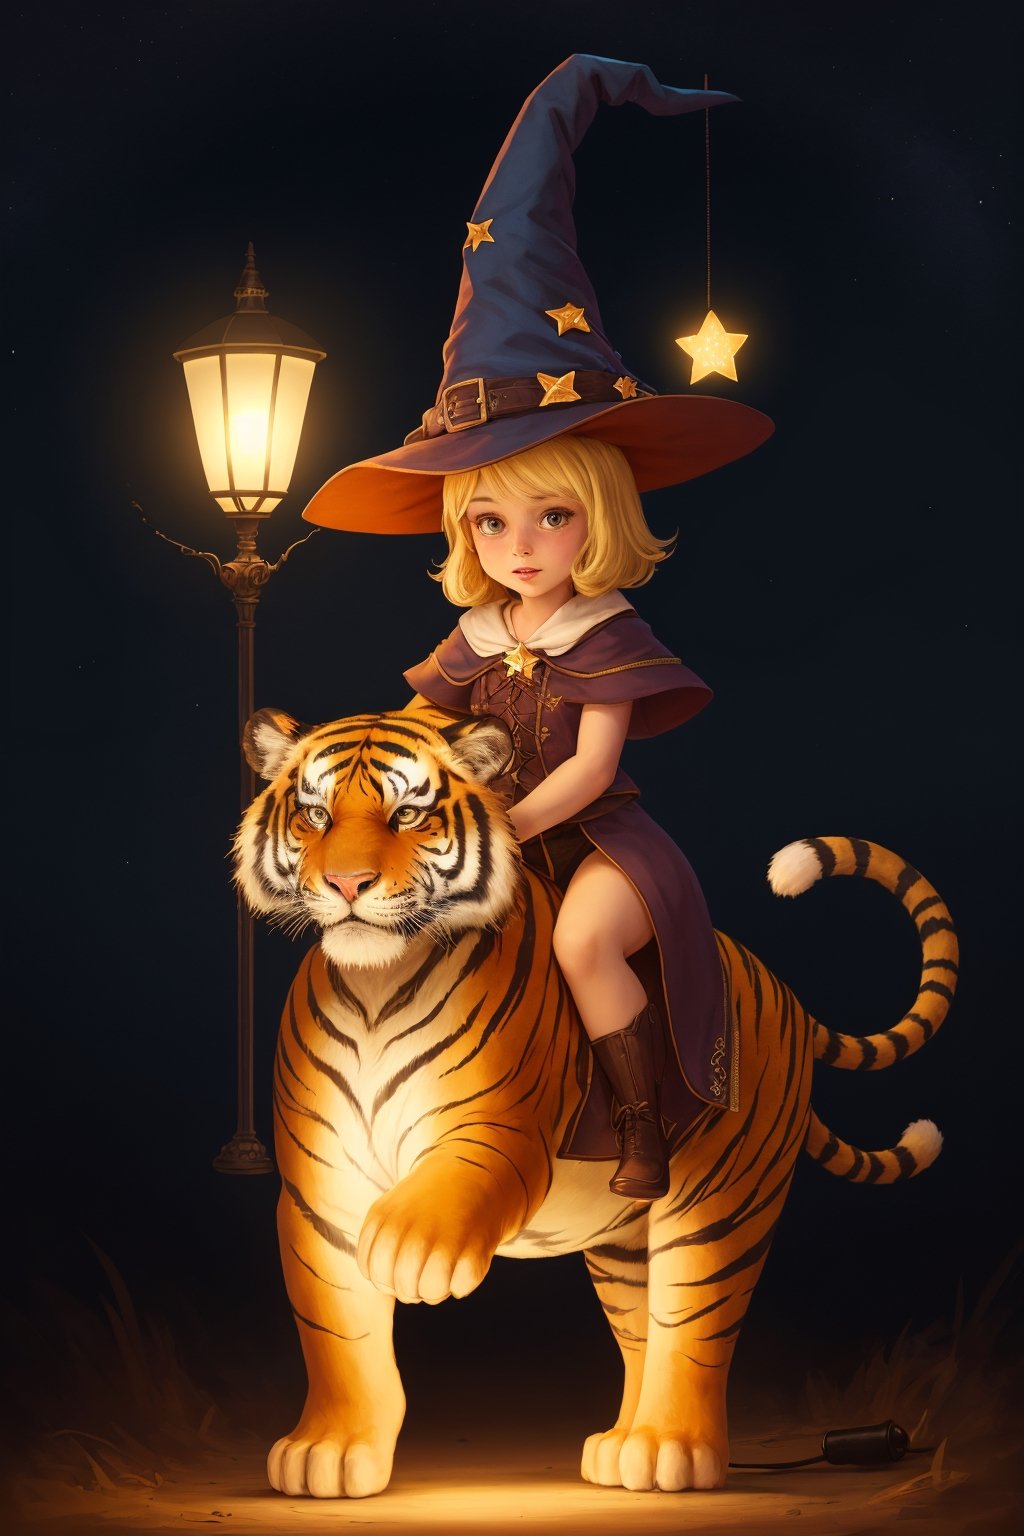 A blonde were witch cap riding on tiger holding a lamp in Night background with sparking star.